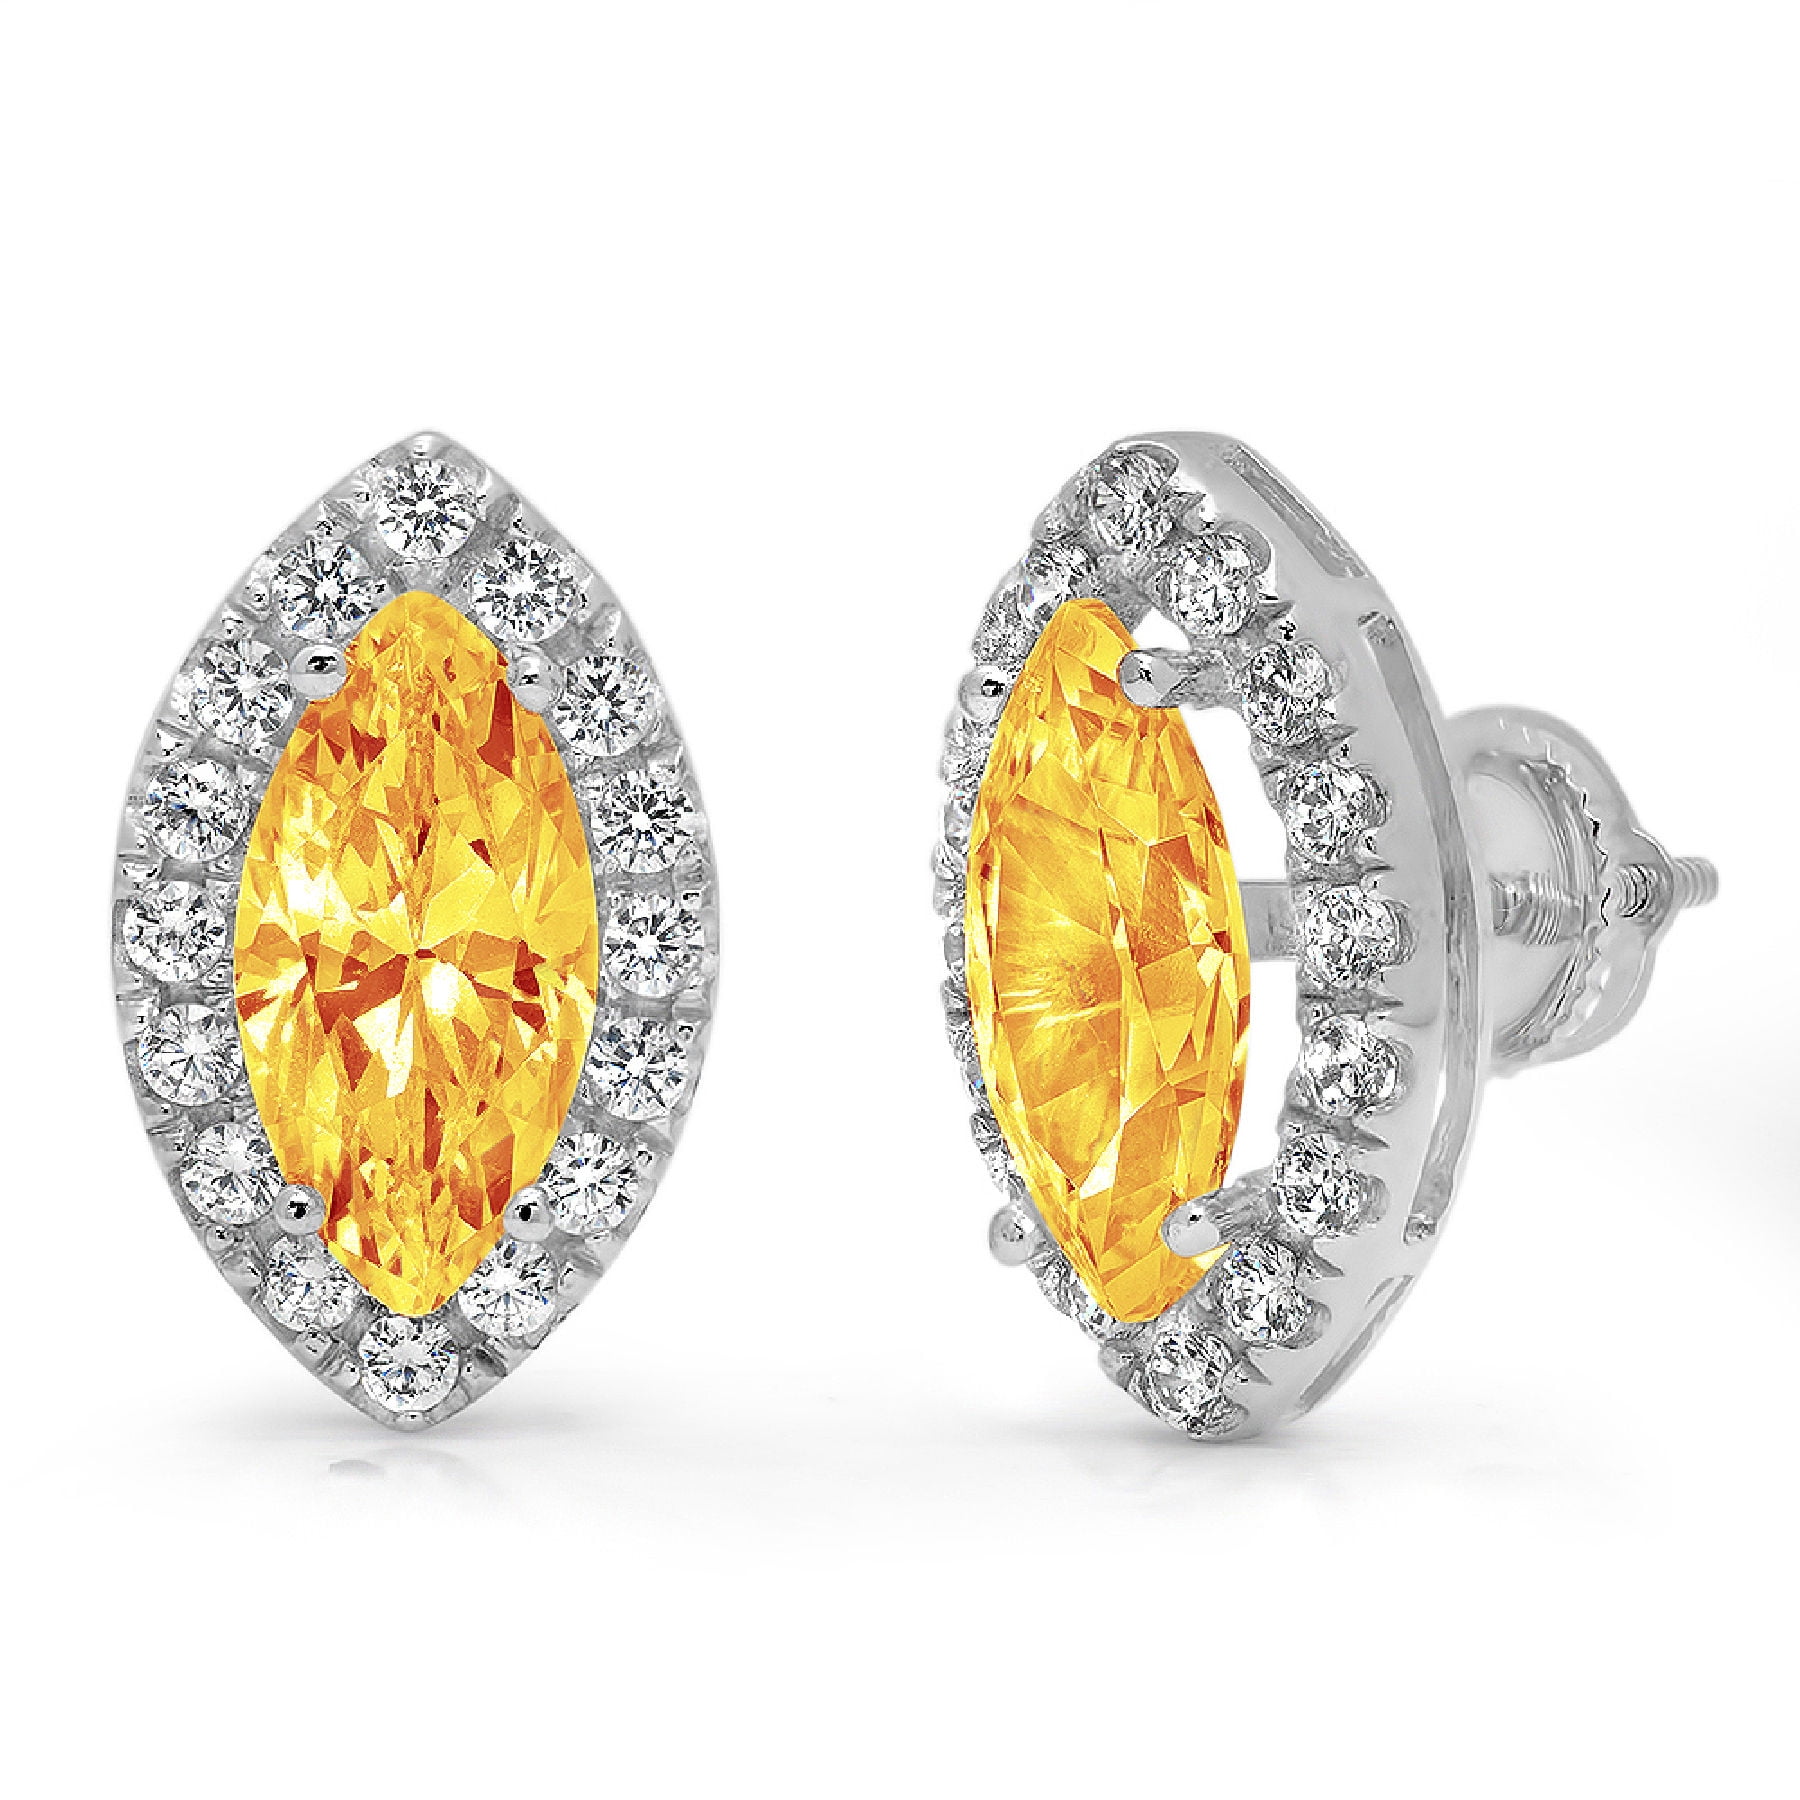 Details about   3.50 Ct Round Cut Canary Earrings Studs Solid 14K Yellow Gold Screw Back Martini